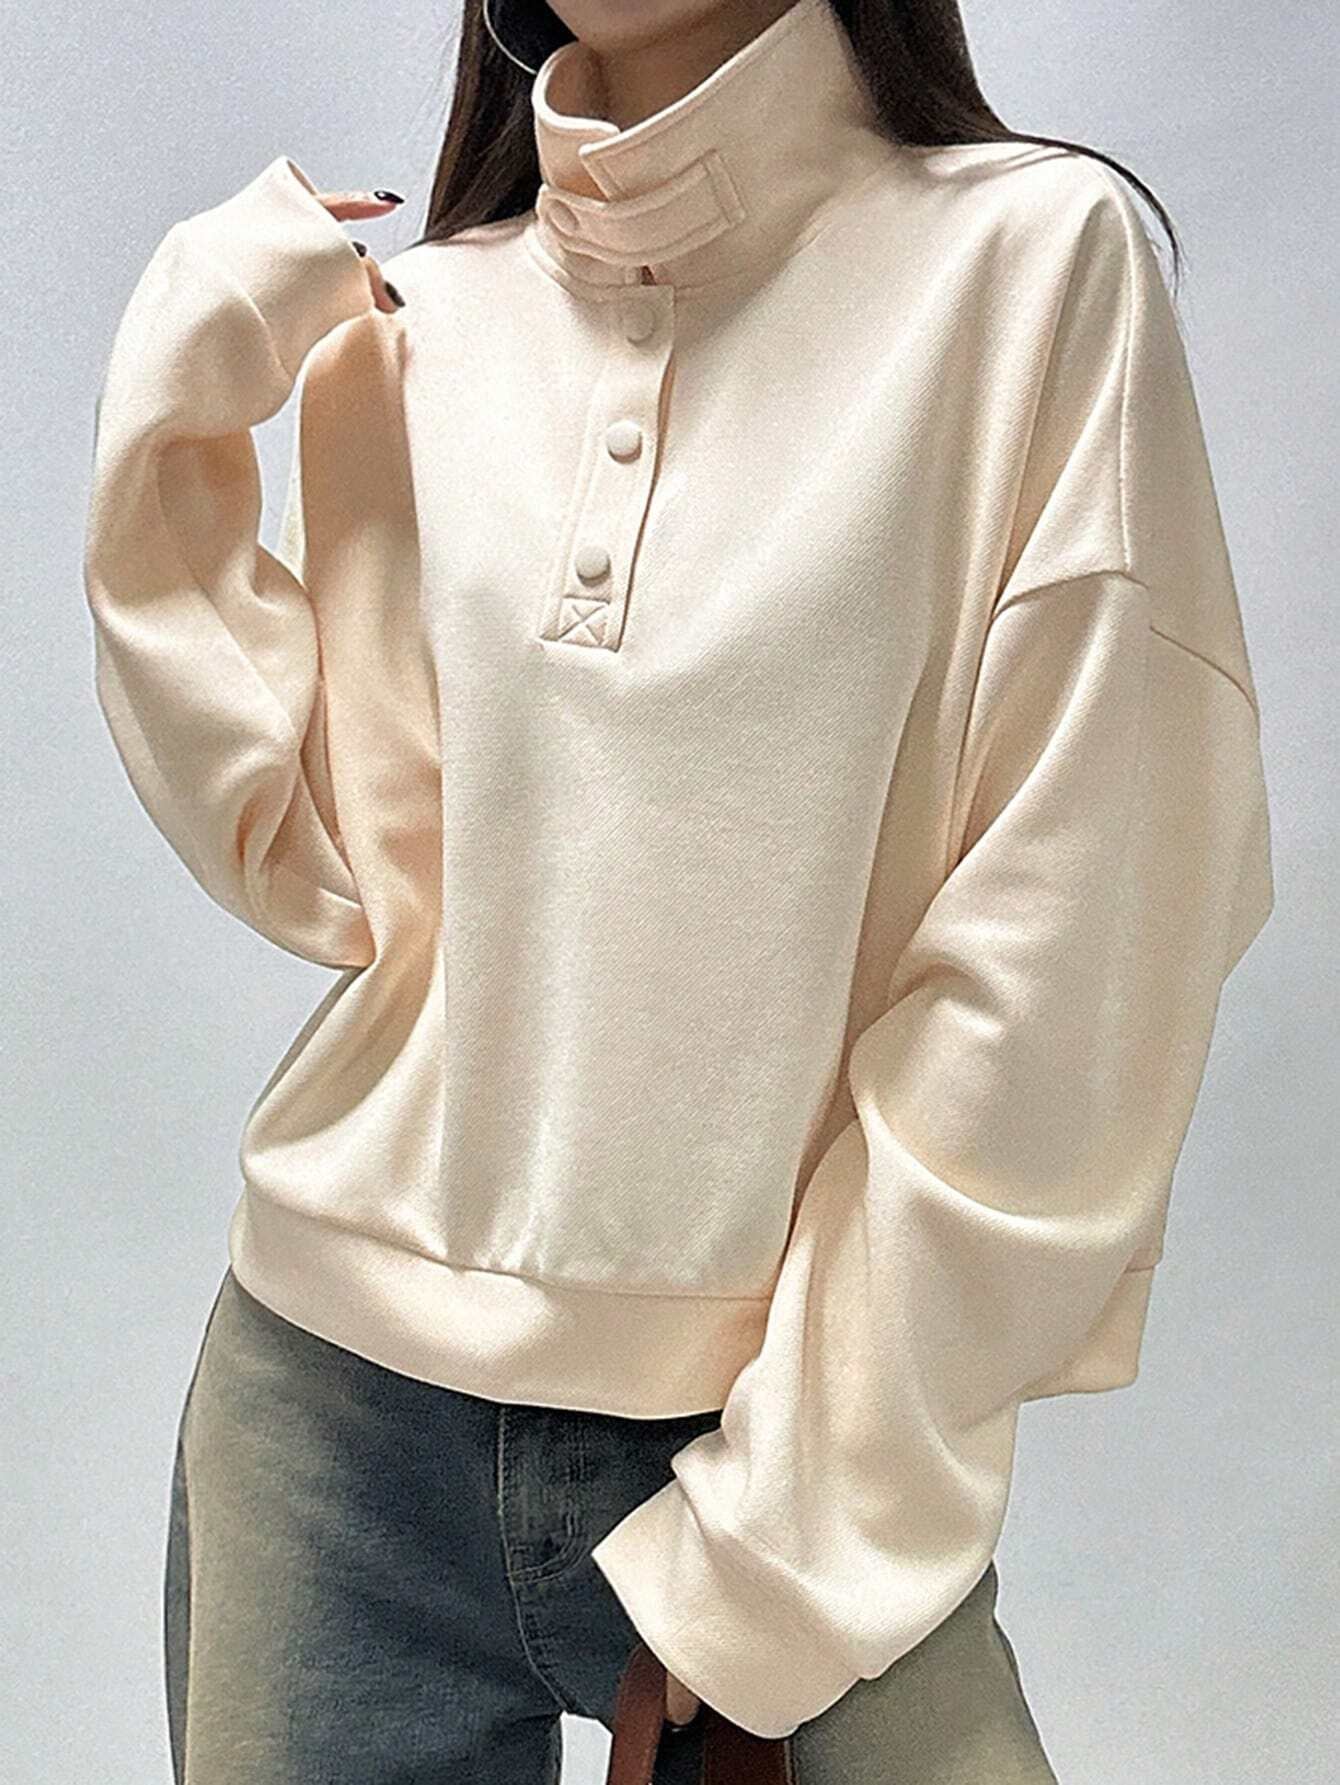 Women's Long Sleeve Sweatshirt with Half Placket and Drop Shoulder Buttons.